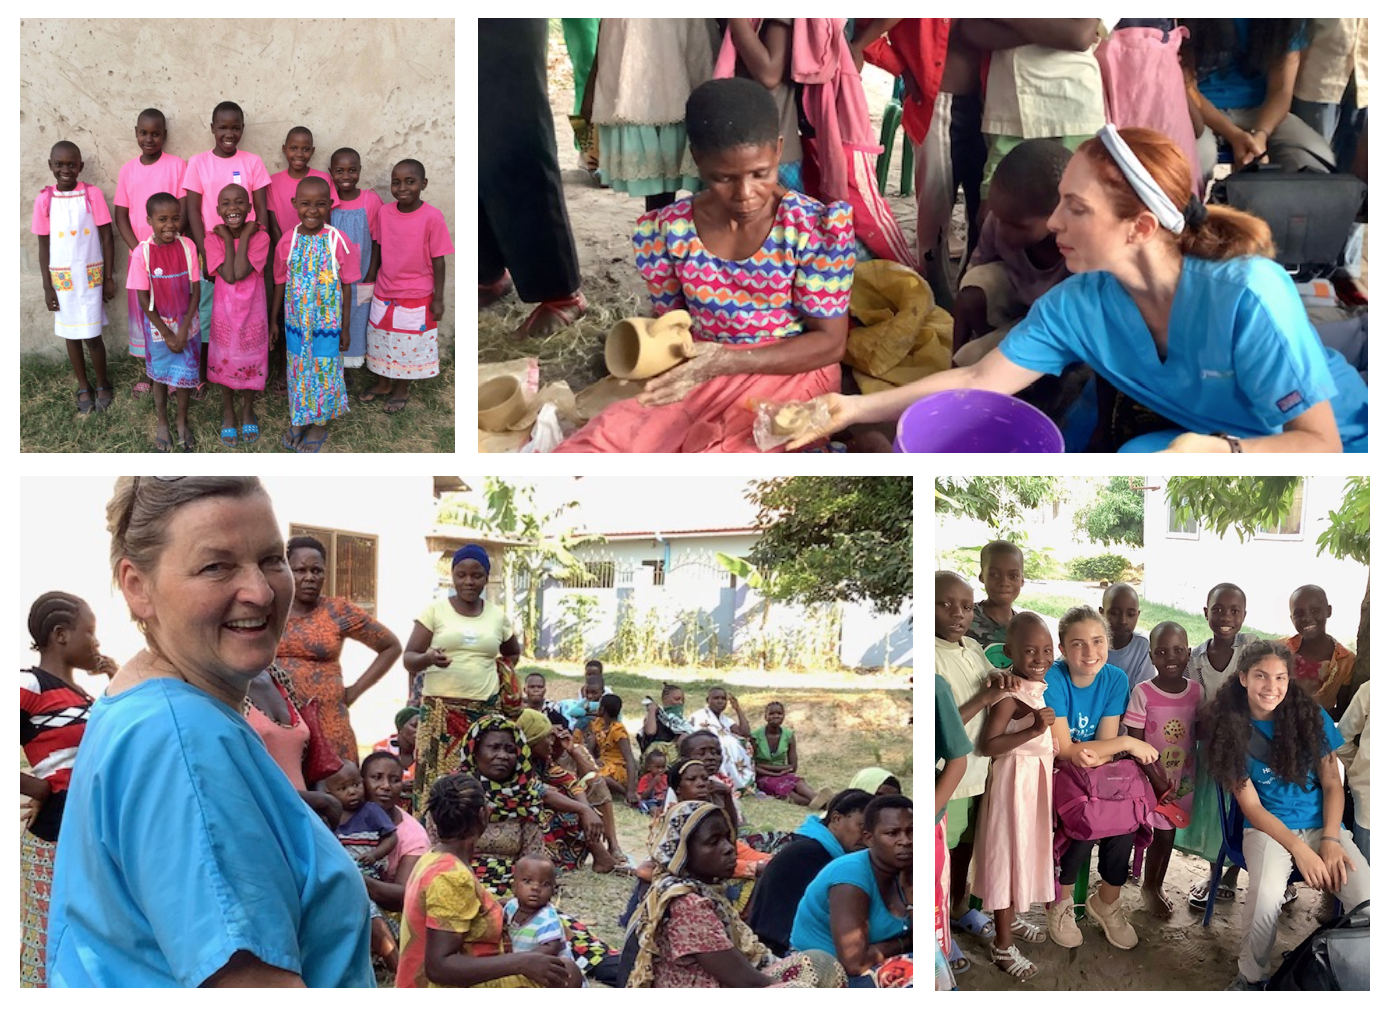 Collage of photos: 1. Group of children smiling in pink shirts, 2. Woman and nurse working on pottery, 3. group of people smiling, 4. group of children smiling.